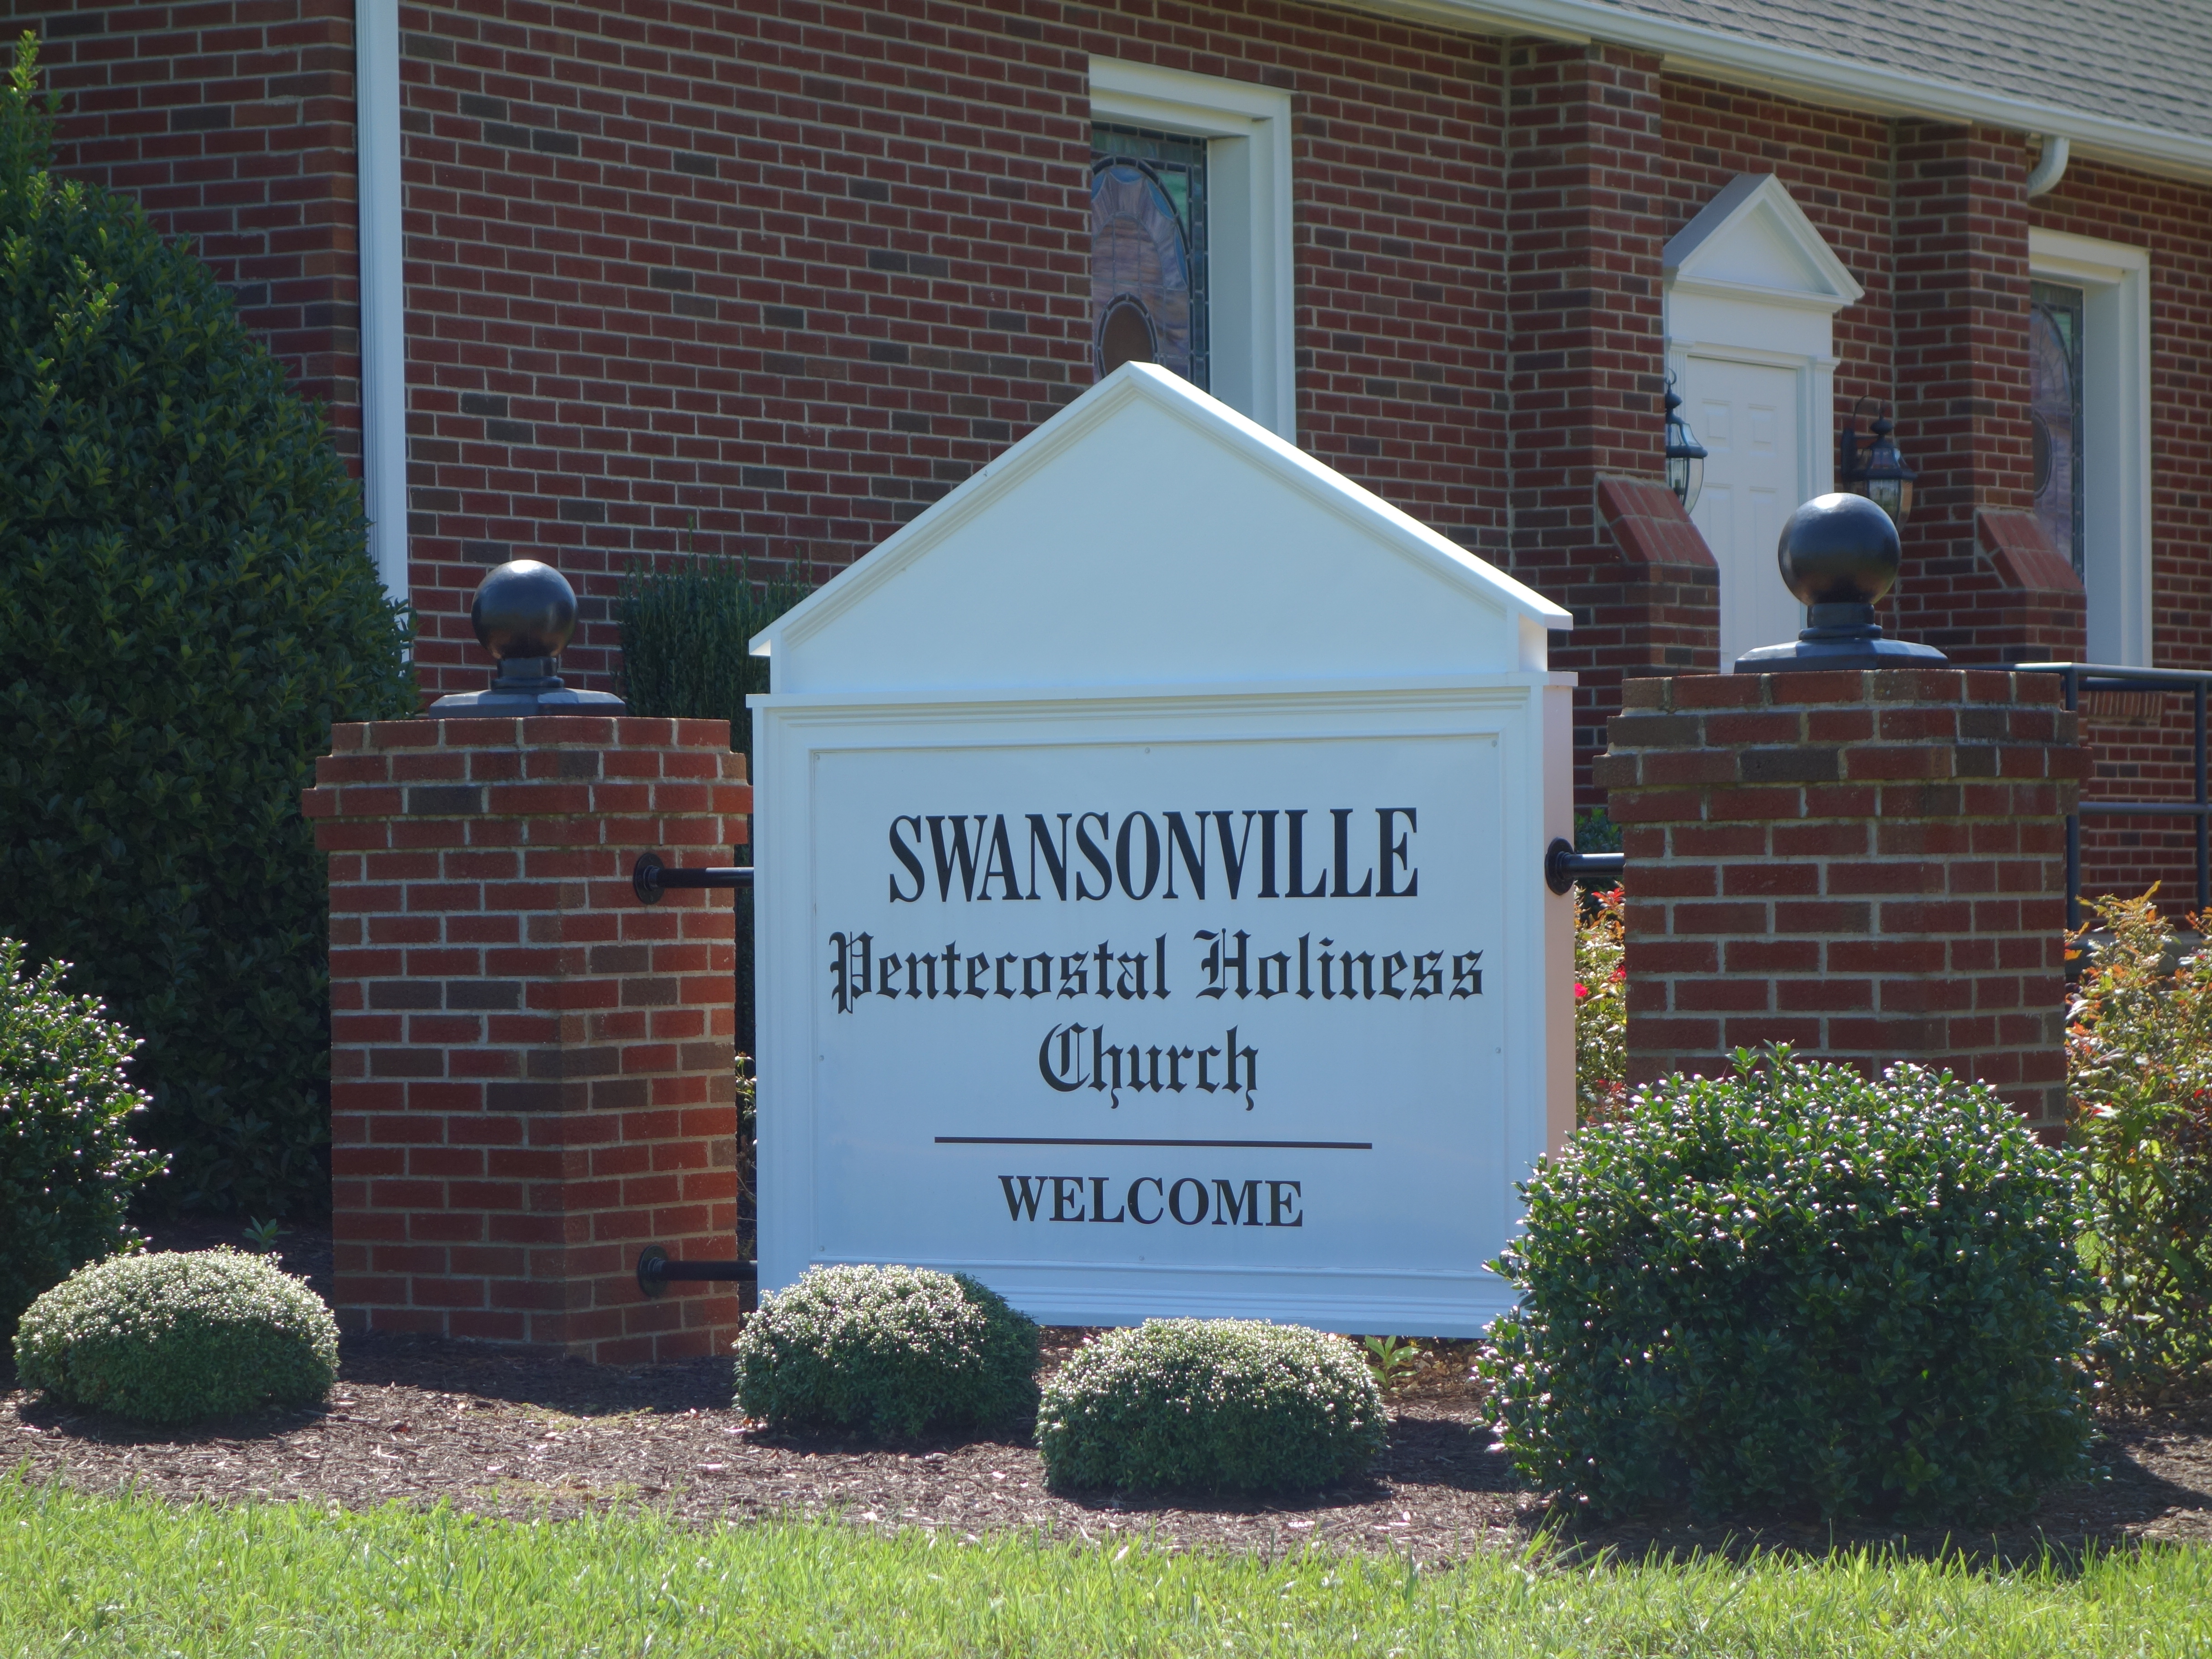 Swansonville Penticostal Holiness Church Welcome Sign